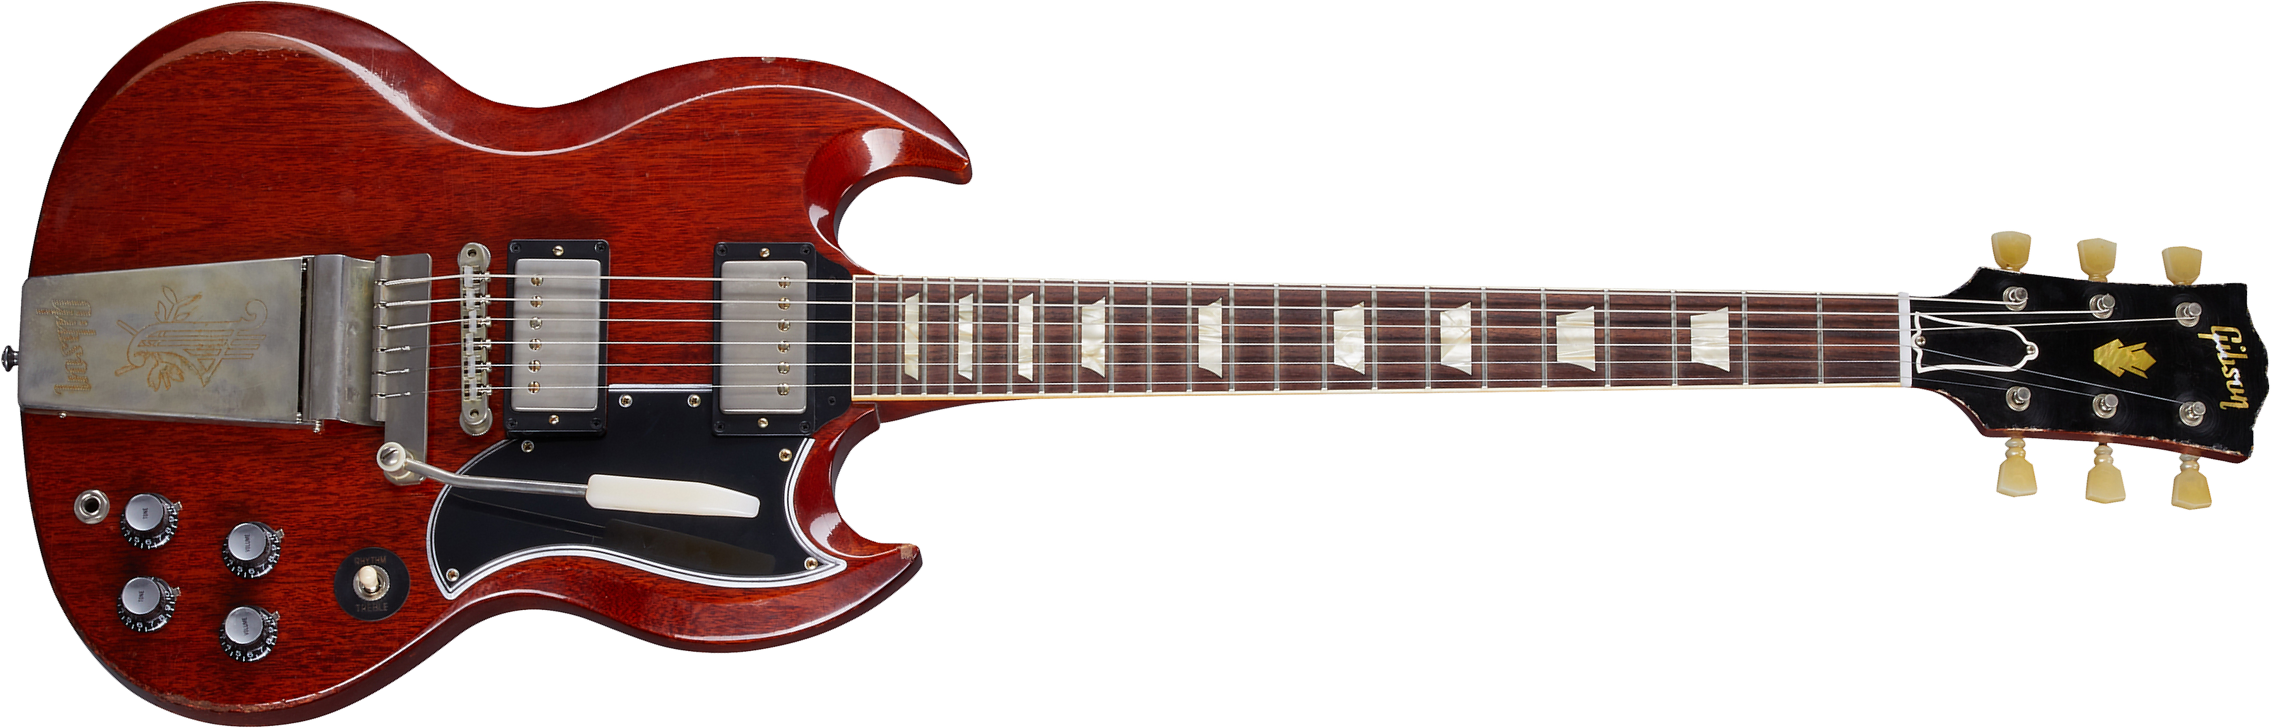 Gibson Custom Shop Murphy Lab Sg Standard 1964 Maestro Reissue Trem 2h Trem Rw - Heavy Aged Faded Cherry - Double cut electric guitar - Main picture